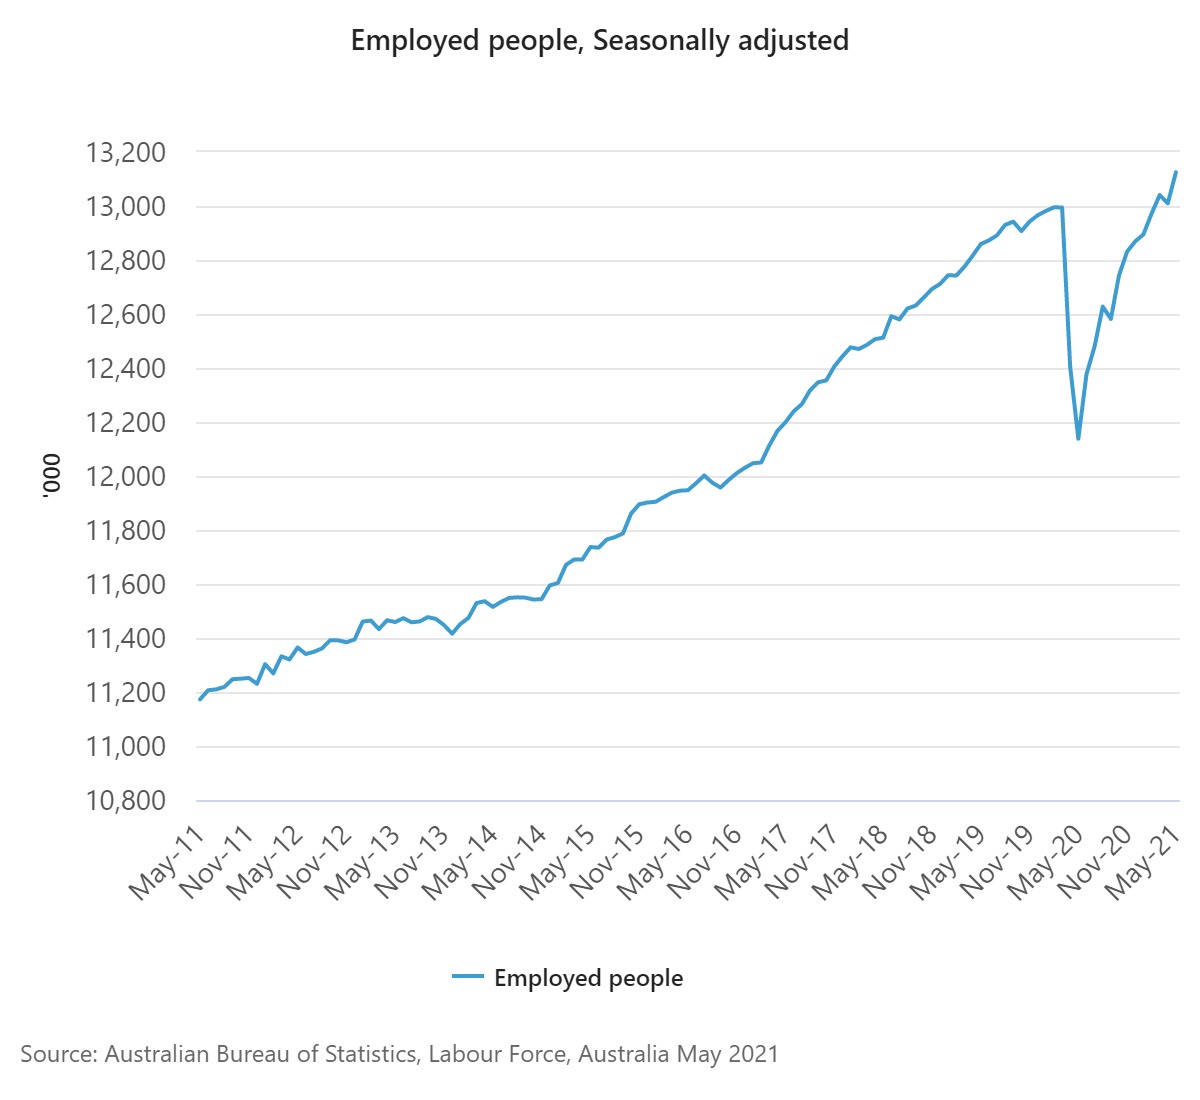 Chart of employed people. Australia, from May 2011 to May 2021.